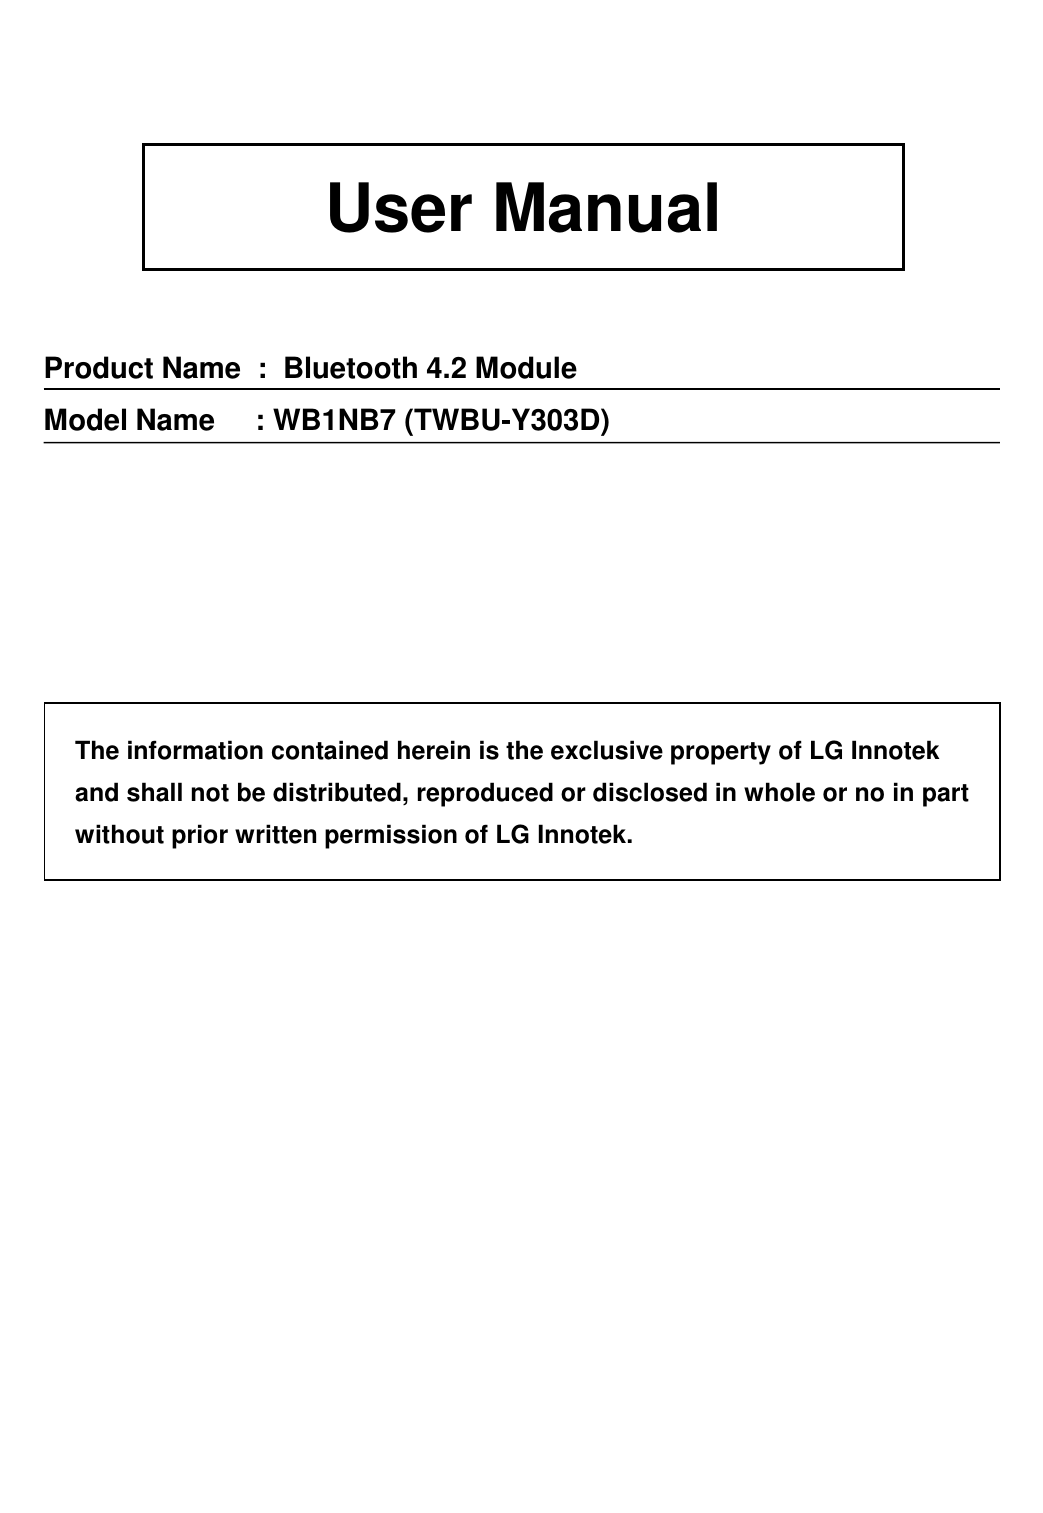 User Manual The information contained herein is the exclusive property of LG Innotek and shall not be distributed, reproduced or disclosed in whole or no in part without prior written permission of LG Innotek. Product Name  :  Bluetooth 4.2 Module Model Name     : WB1NB7 (TWBU-Y303D) 